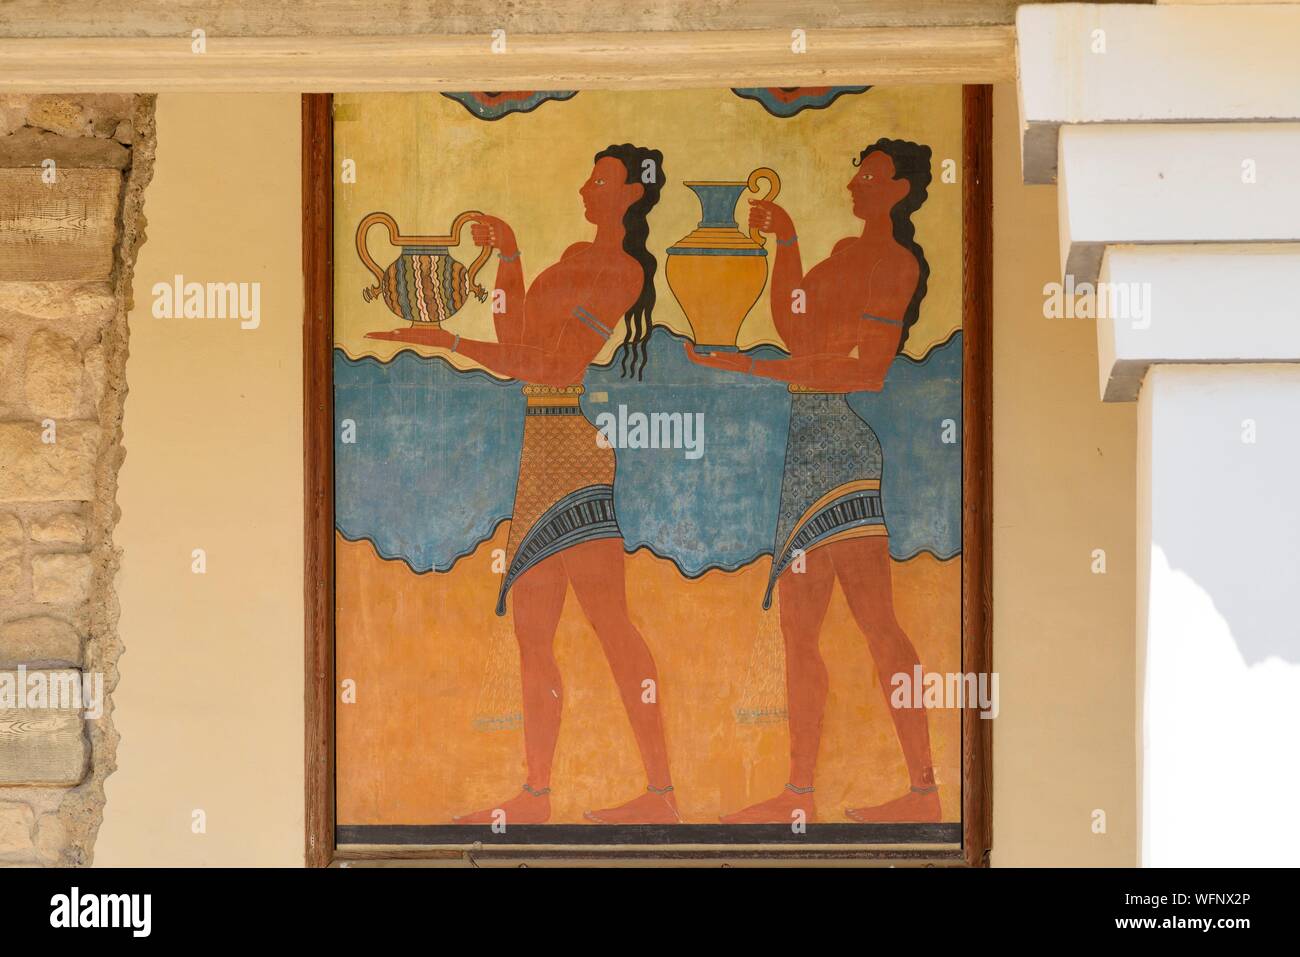 Greece, Crete, Knossos, archeological site, Palace of King Minos, fresco of the procession: young Minoans carrying ritual vases (15th century BC) Stock Photo